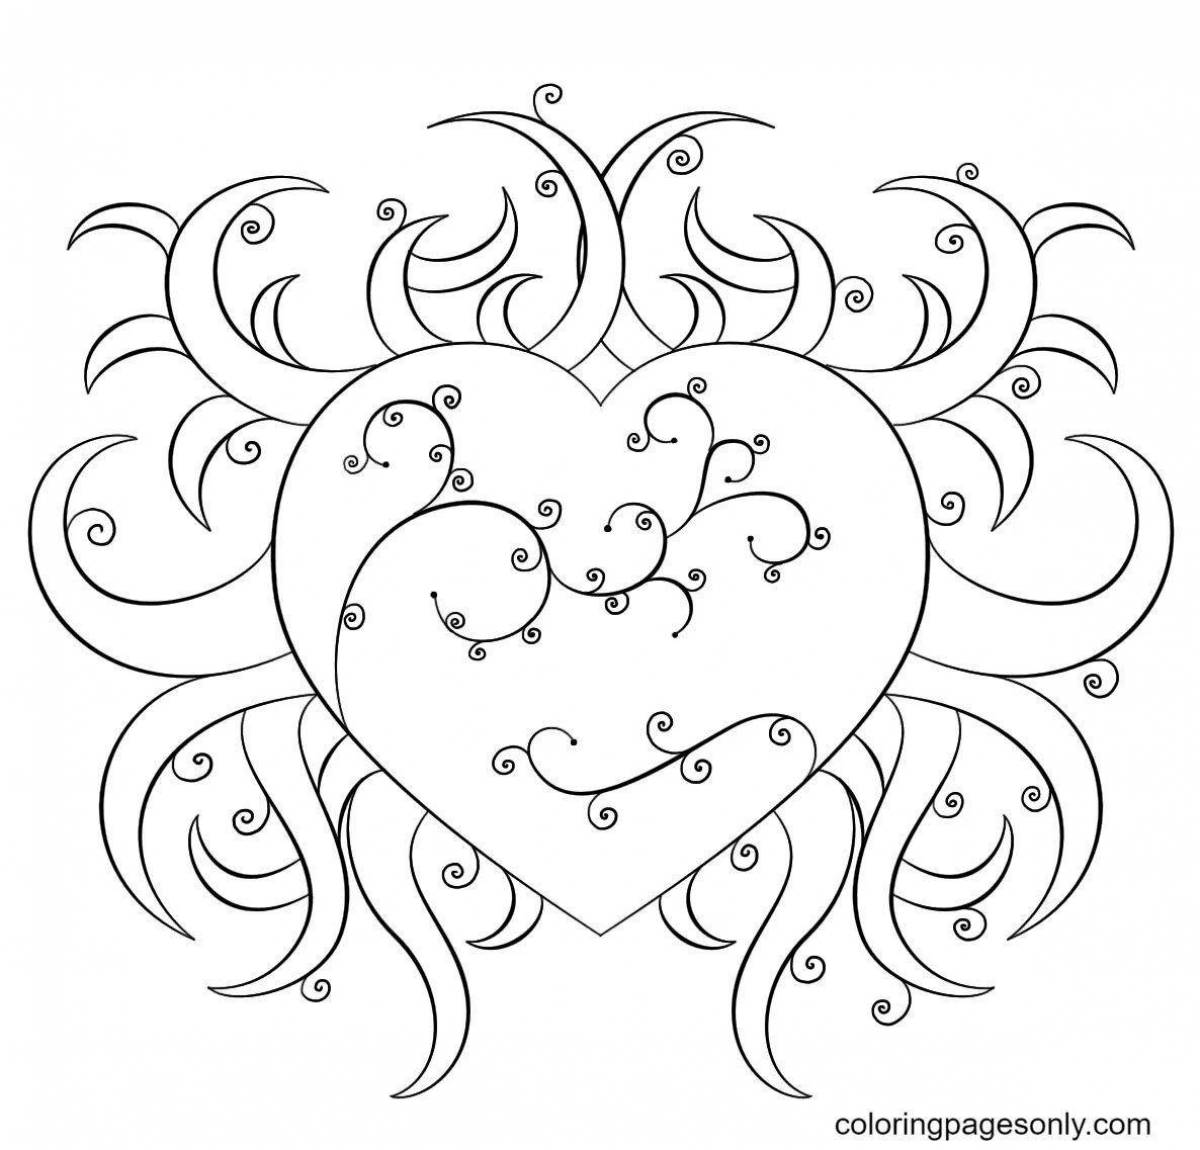 Awesome heart coloring page